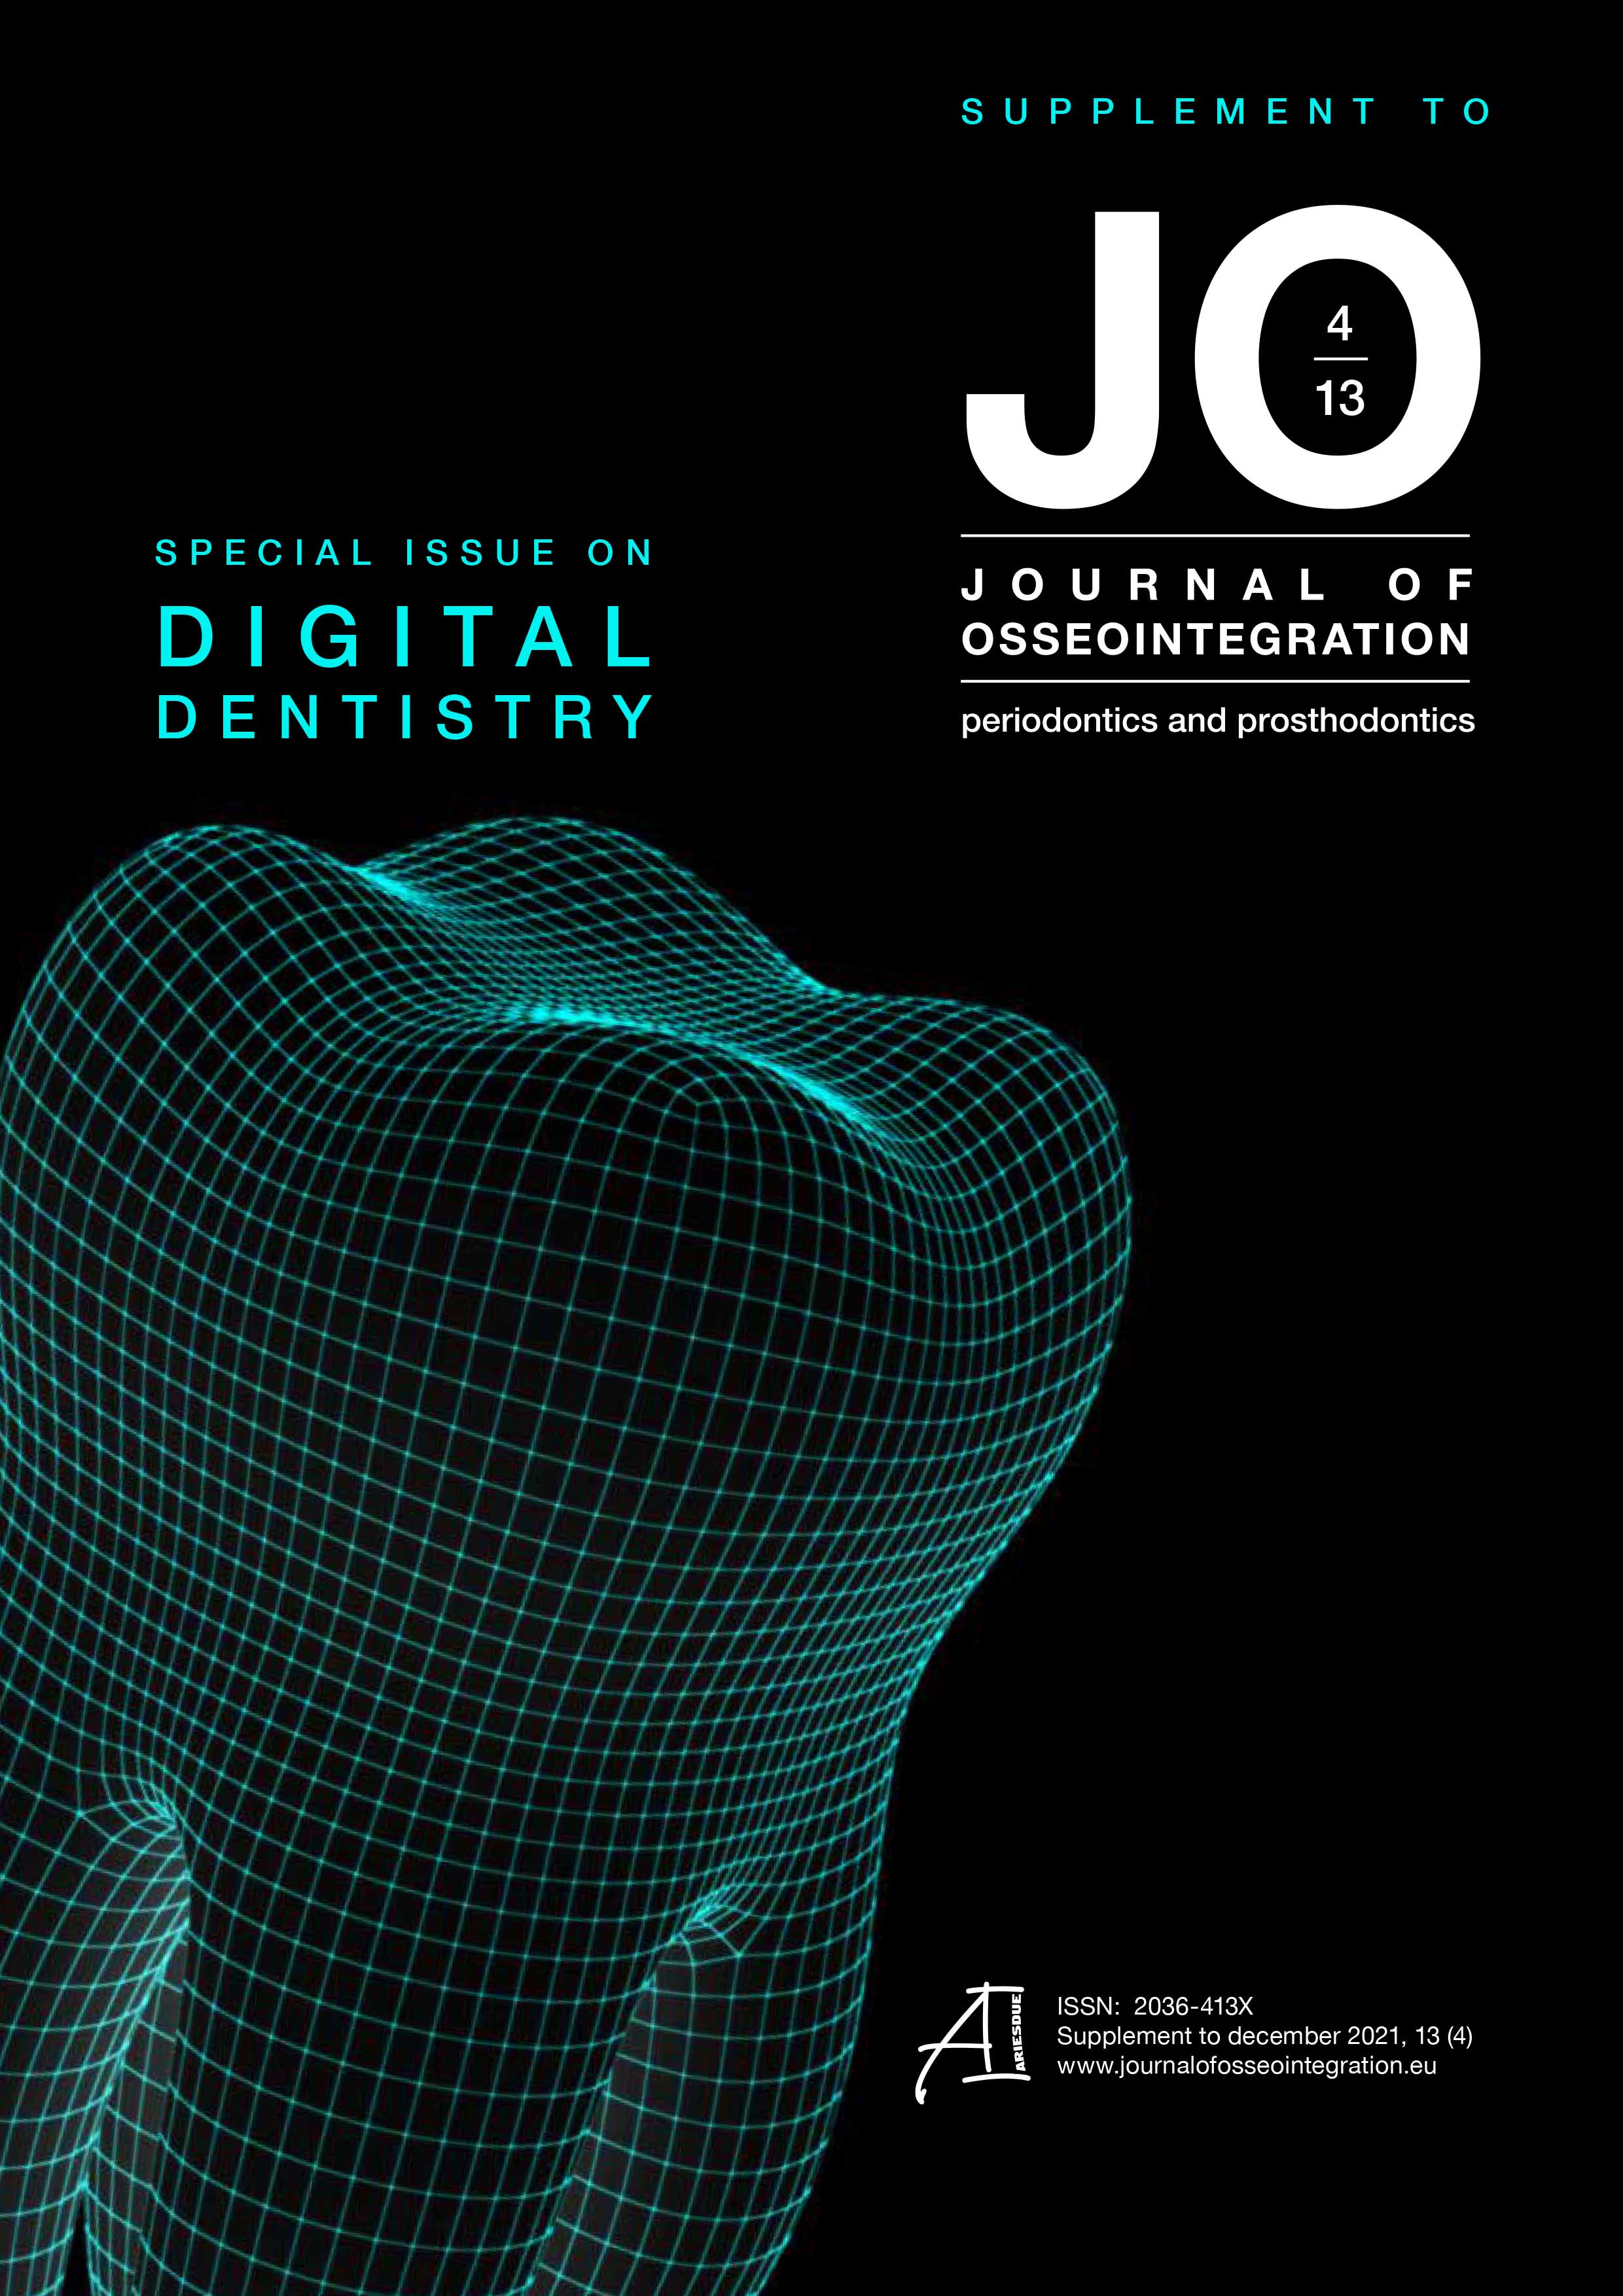 					View Special Issue on Digital Dentistry - Supplement to 2021 Vol. 13 No. 4
				